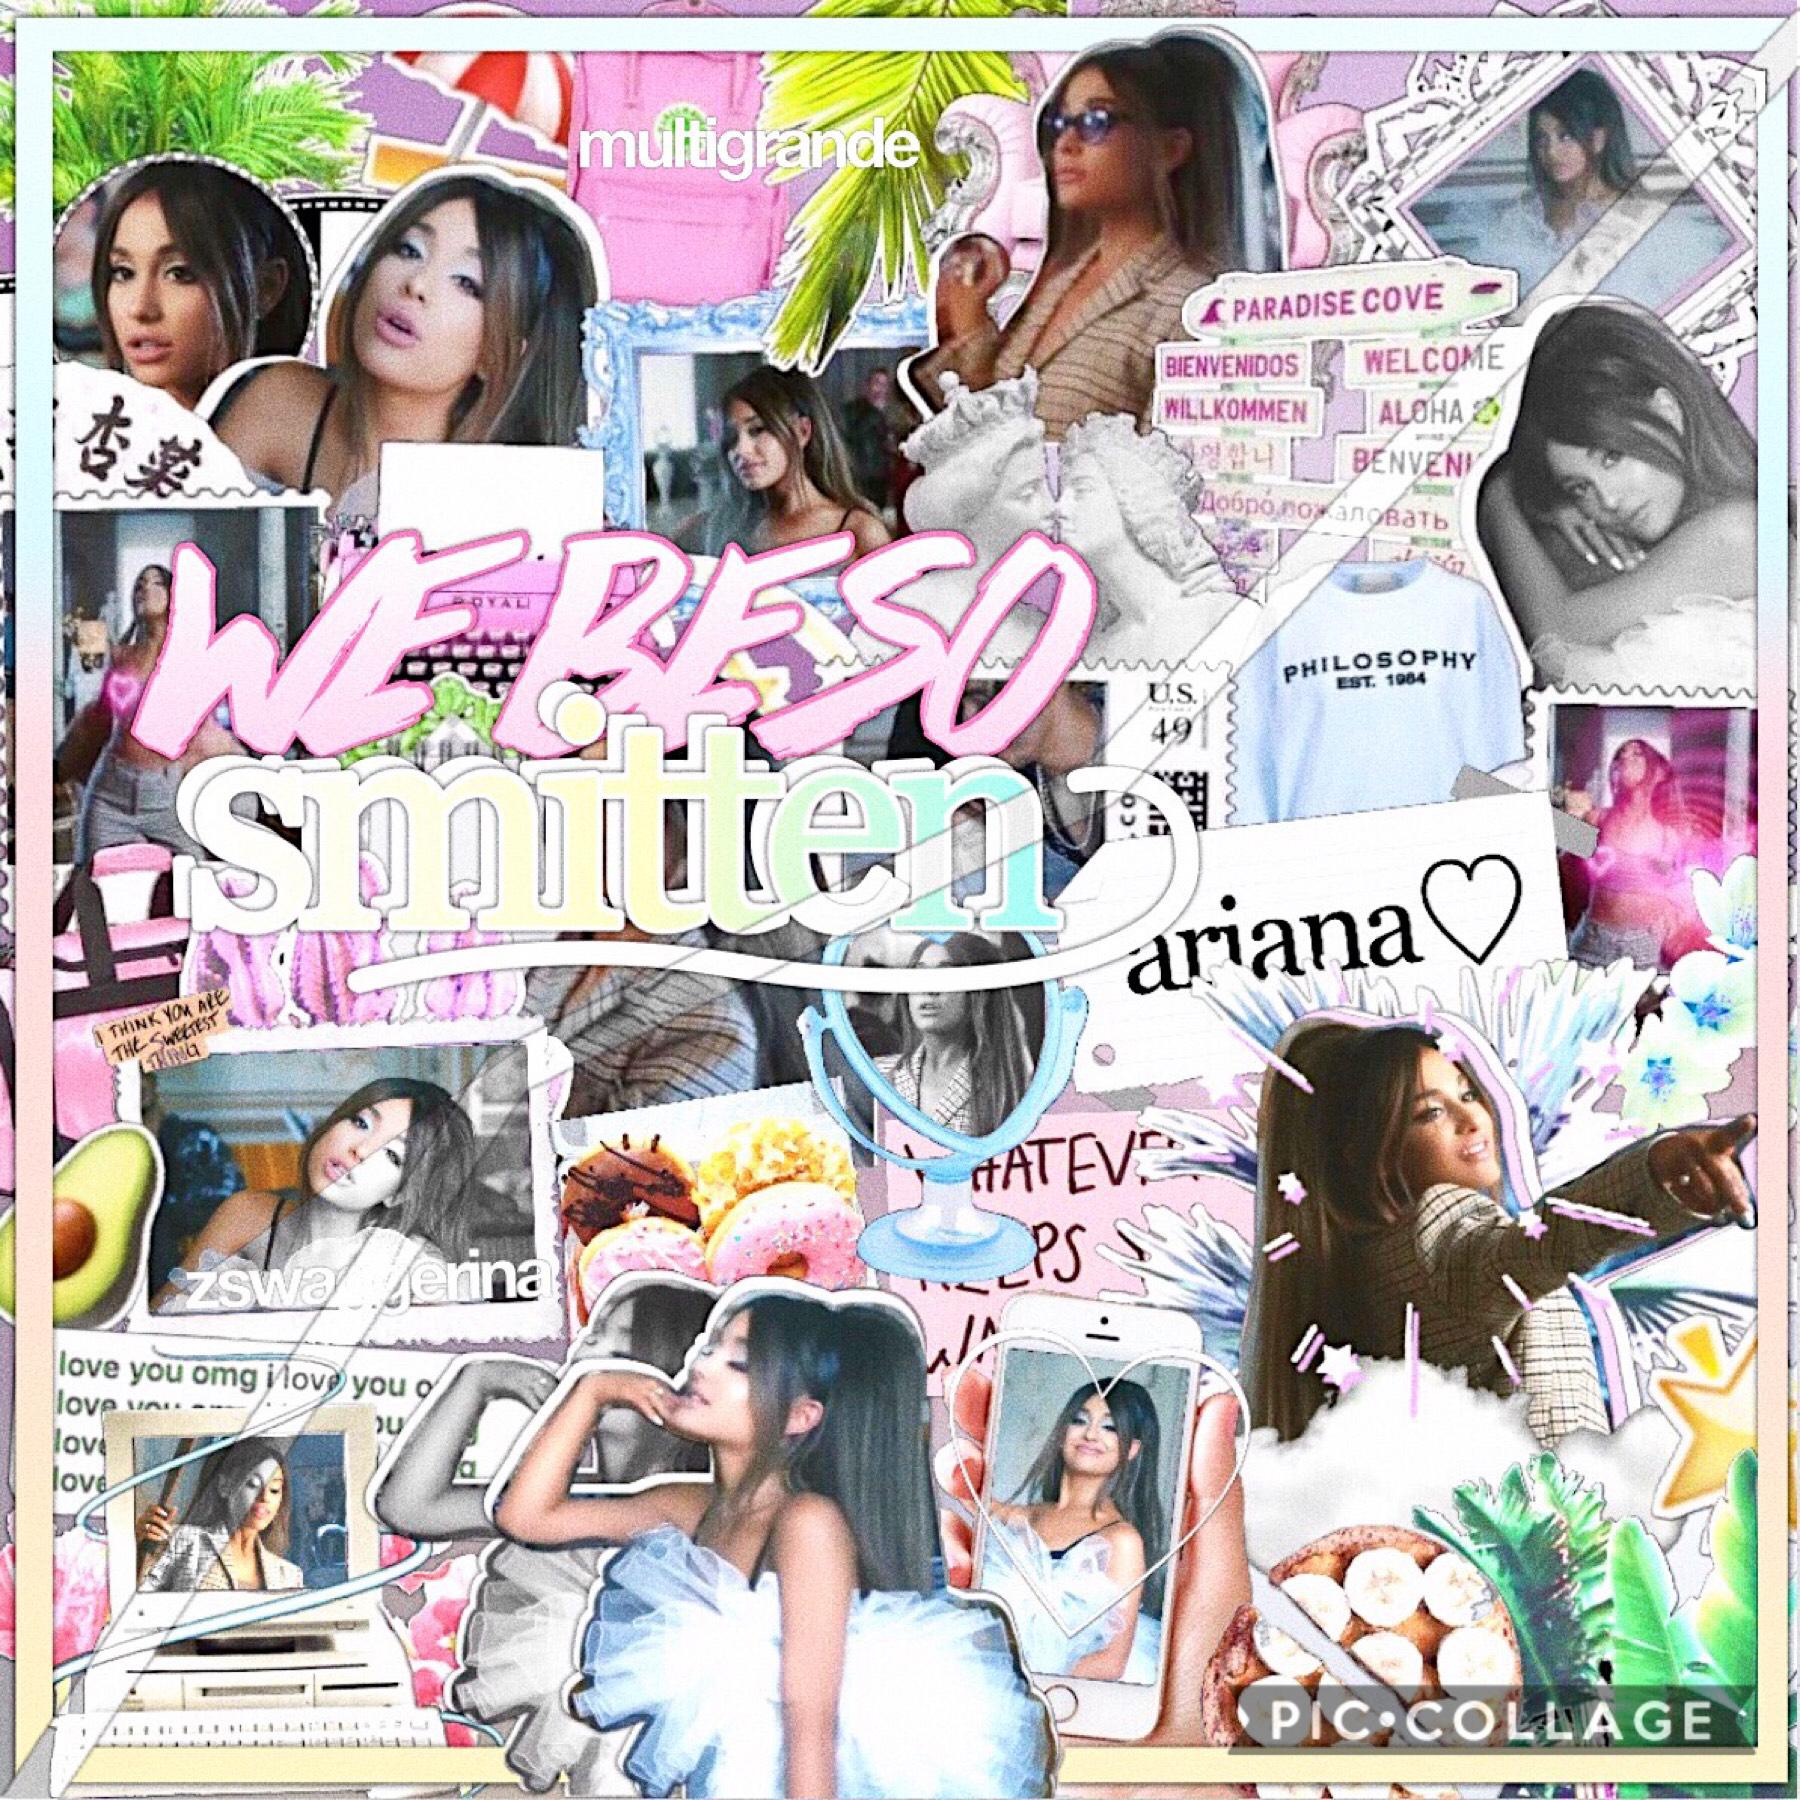 collab with @ multigrande 💗💚 I know I’m continuously posting but I have a lot of stuff to post 😉 
follow my spam acc: @kellithinkshescool